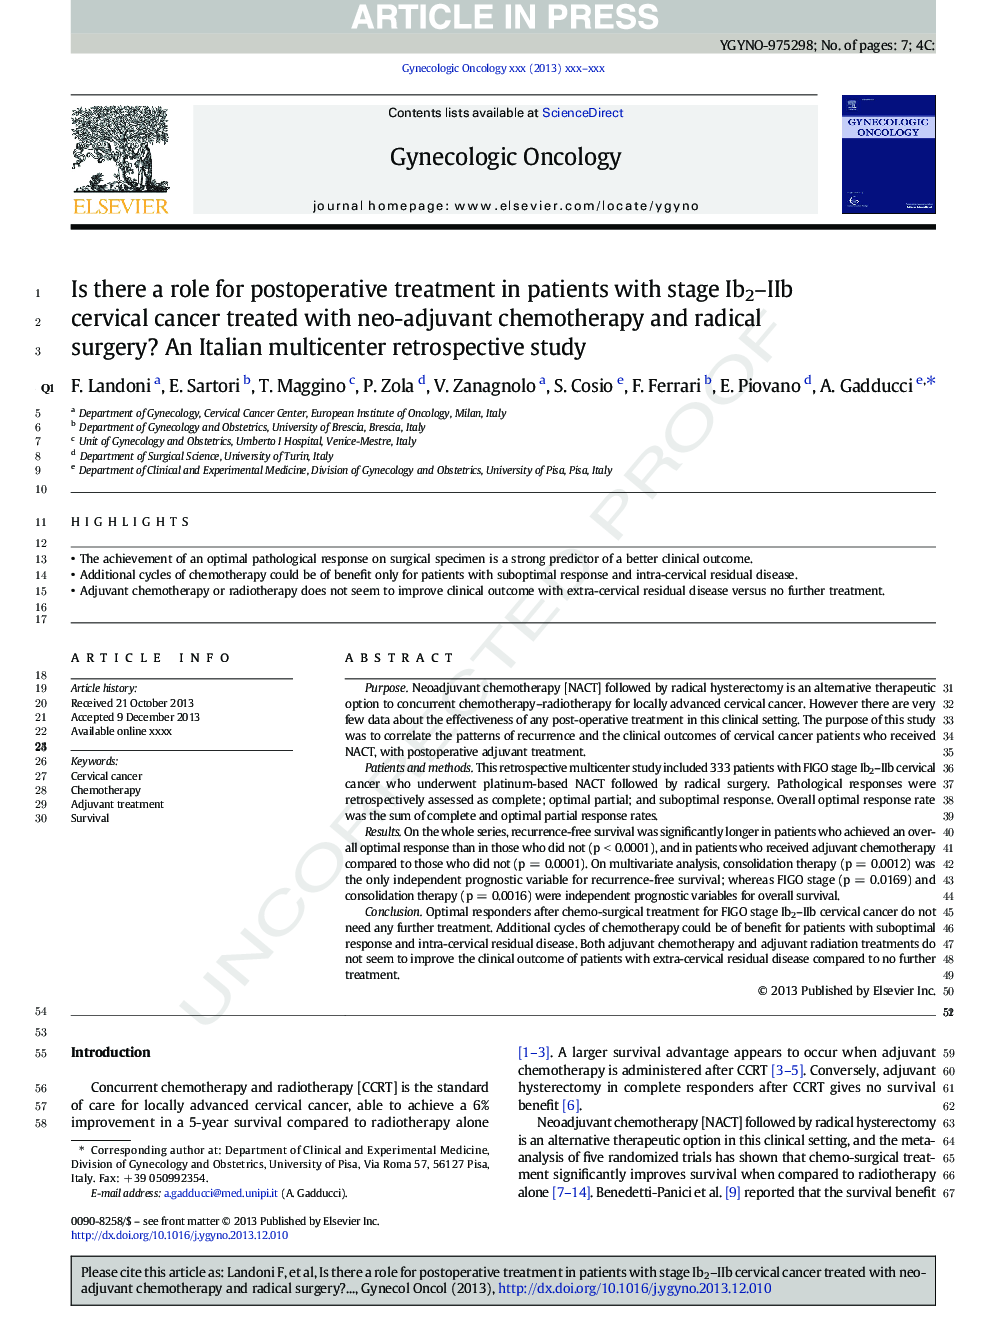 Is there a role for postoperative treatment in patients with stage Ib2-IIb cervical cancer treated with neo-adjuvant chemotherapy and radical surgery? An Italian multicenter retrospective study